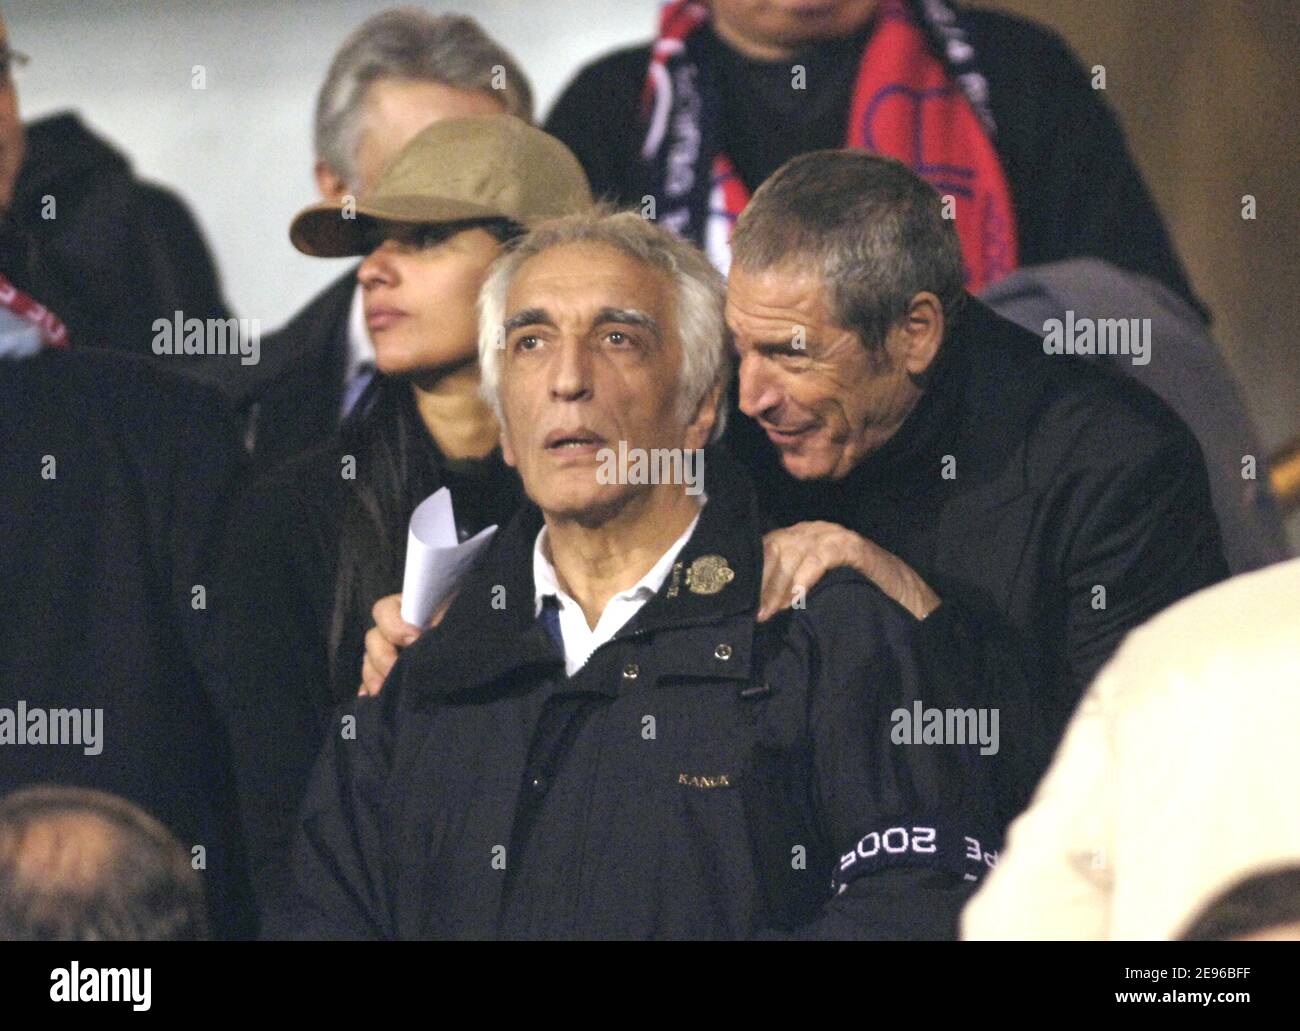 French actor Gerard Darmon and Sport's business manager Jean-Claude Darmond during the quarter finale first heat at the UEFA Champions league match, Olympic Lyonnais vs AC Milan, in Lyon, France, on March 29, 2006. The game ended in a drew 0-0. Photo by Nicolas Gouhier/Cameleon/ABACAPRESS.COM Stock Photo